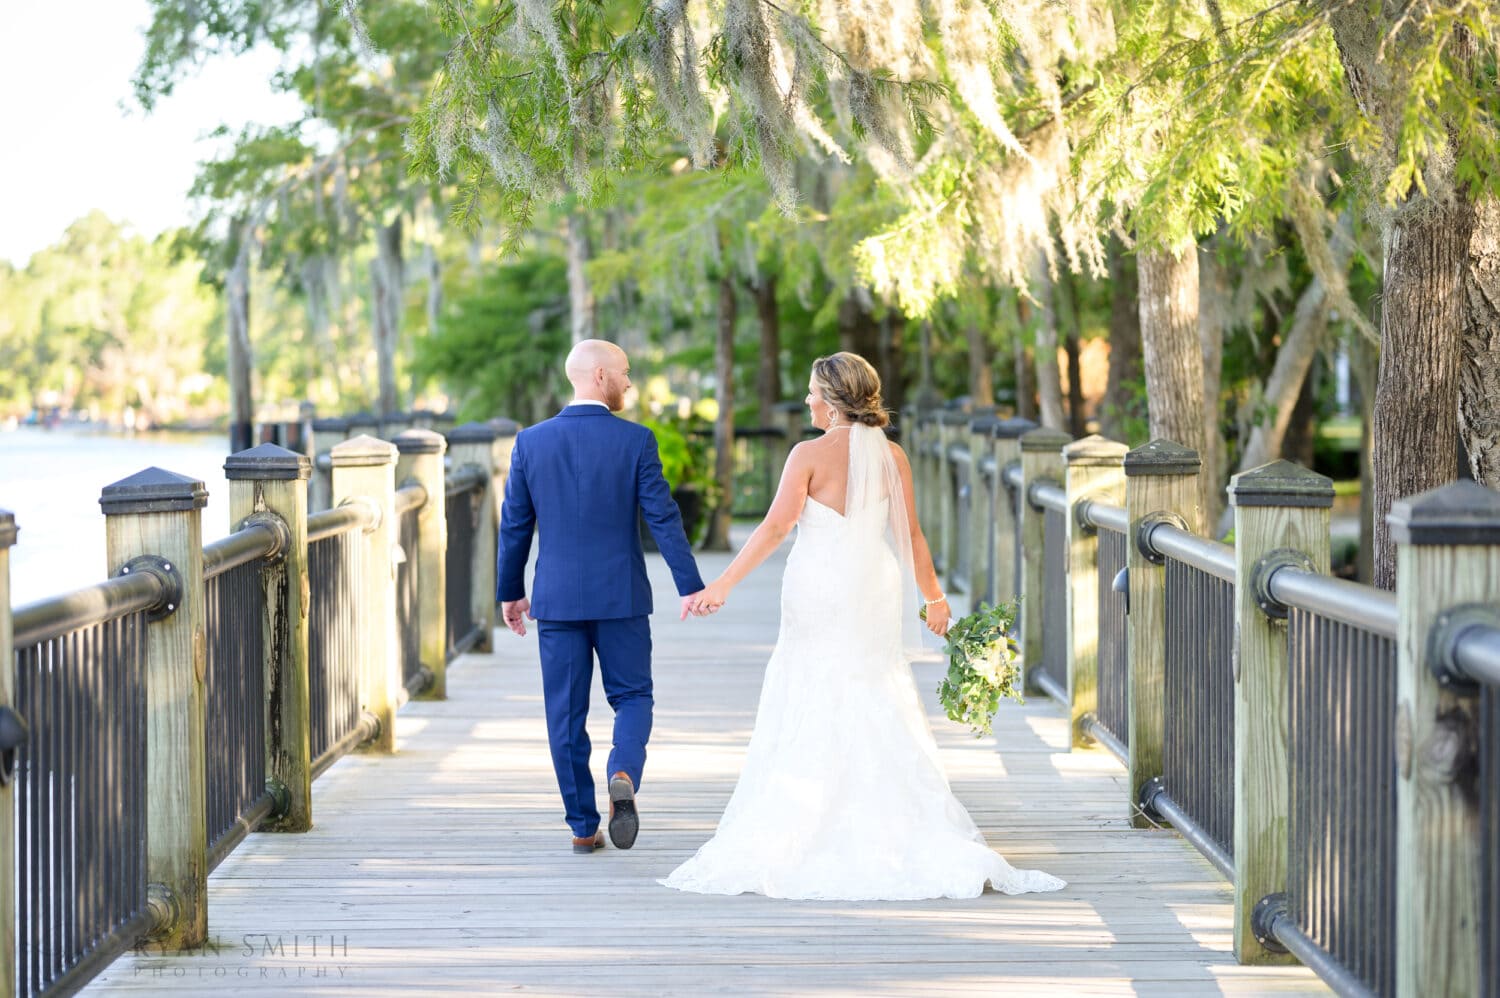 Walking down the boardwalk together - The Conway Riverwalk